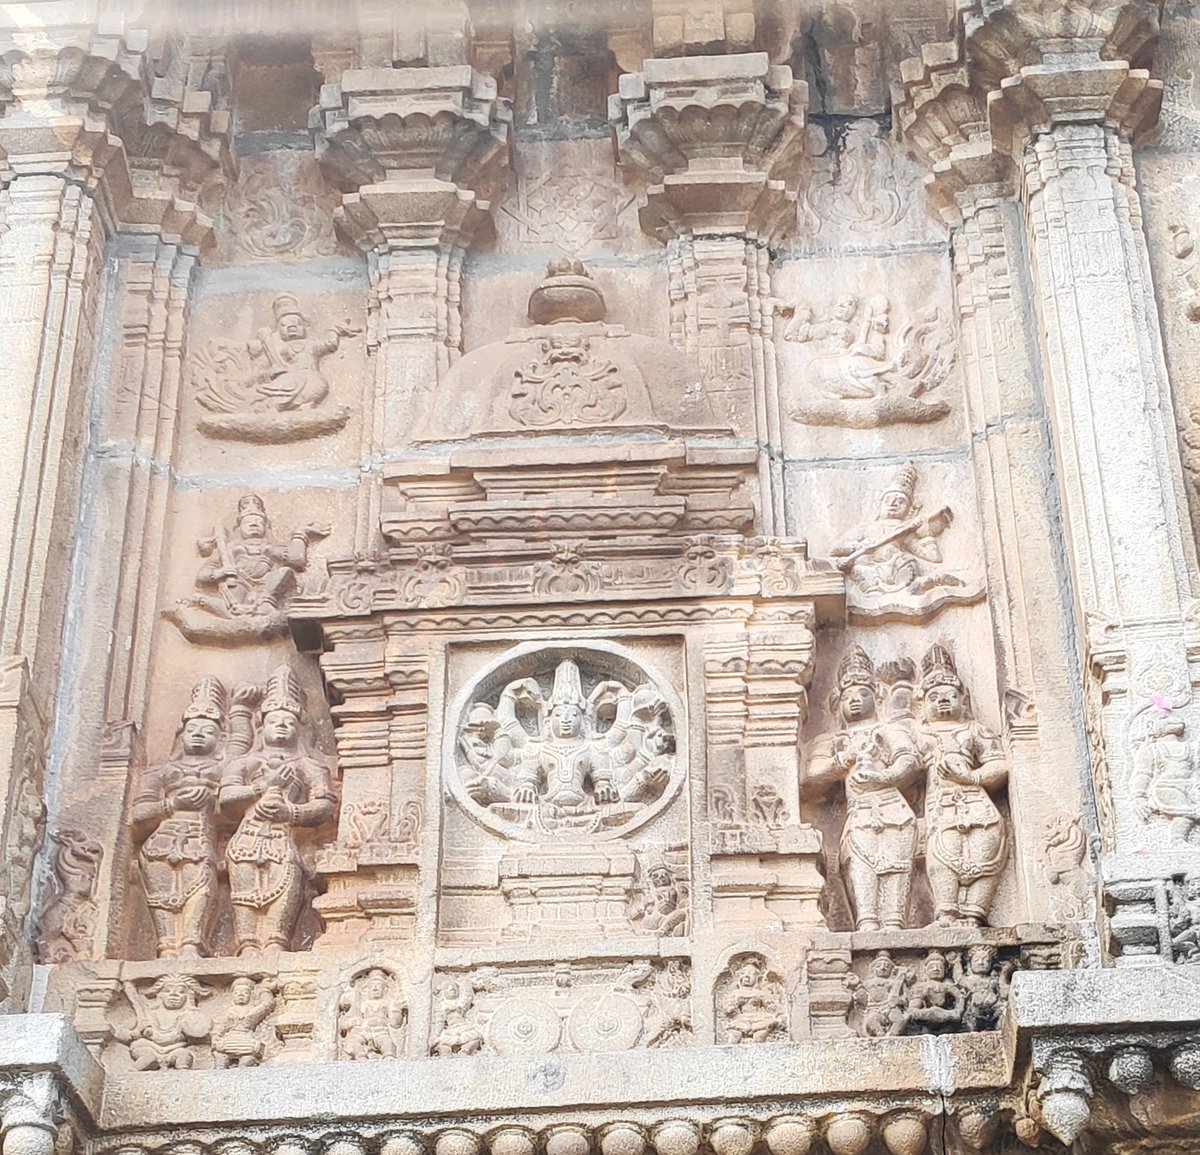 An entire panel dedicated to Lakshmi. The Ashtabhuja (8 armed) Lakshmi. Notice the chariot beneath. Doesn't it remind you of Hampi?